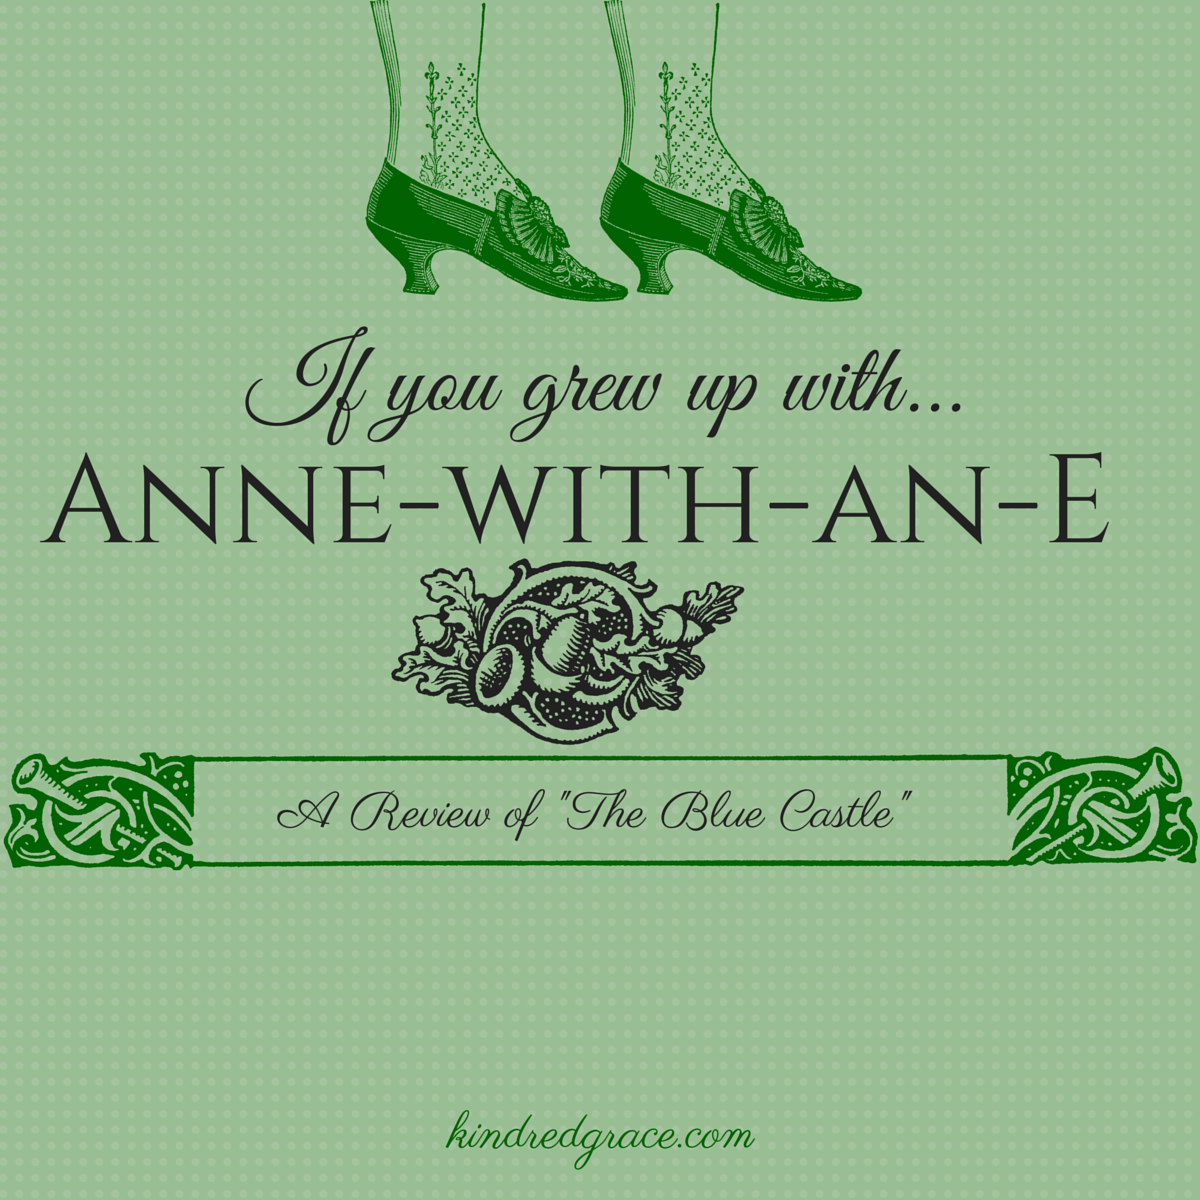 If You Grew Up with Anne-with-an-E